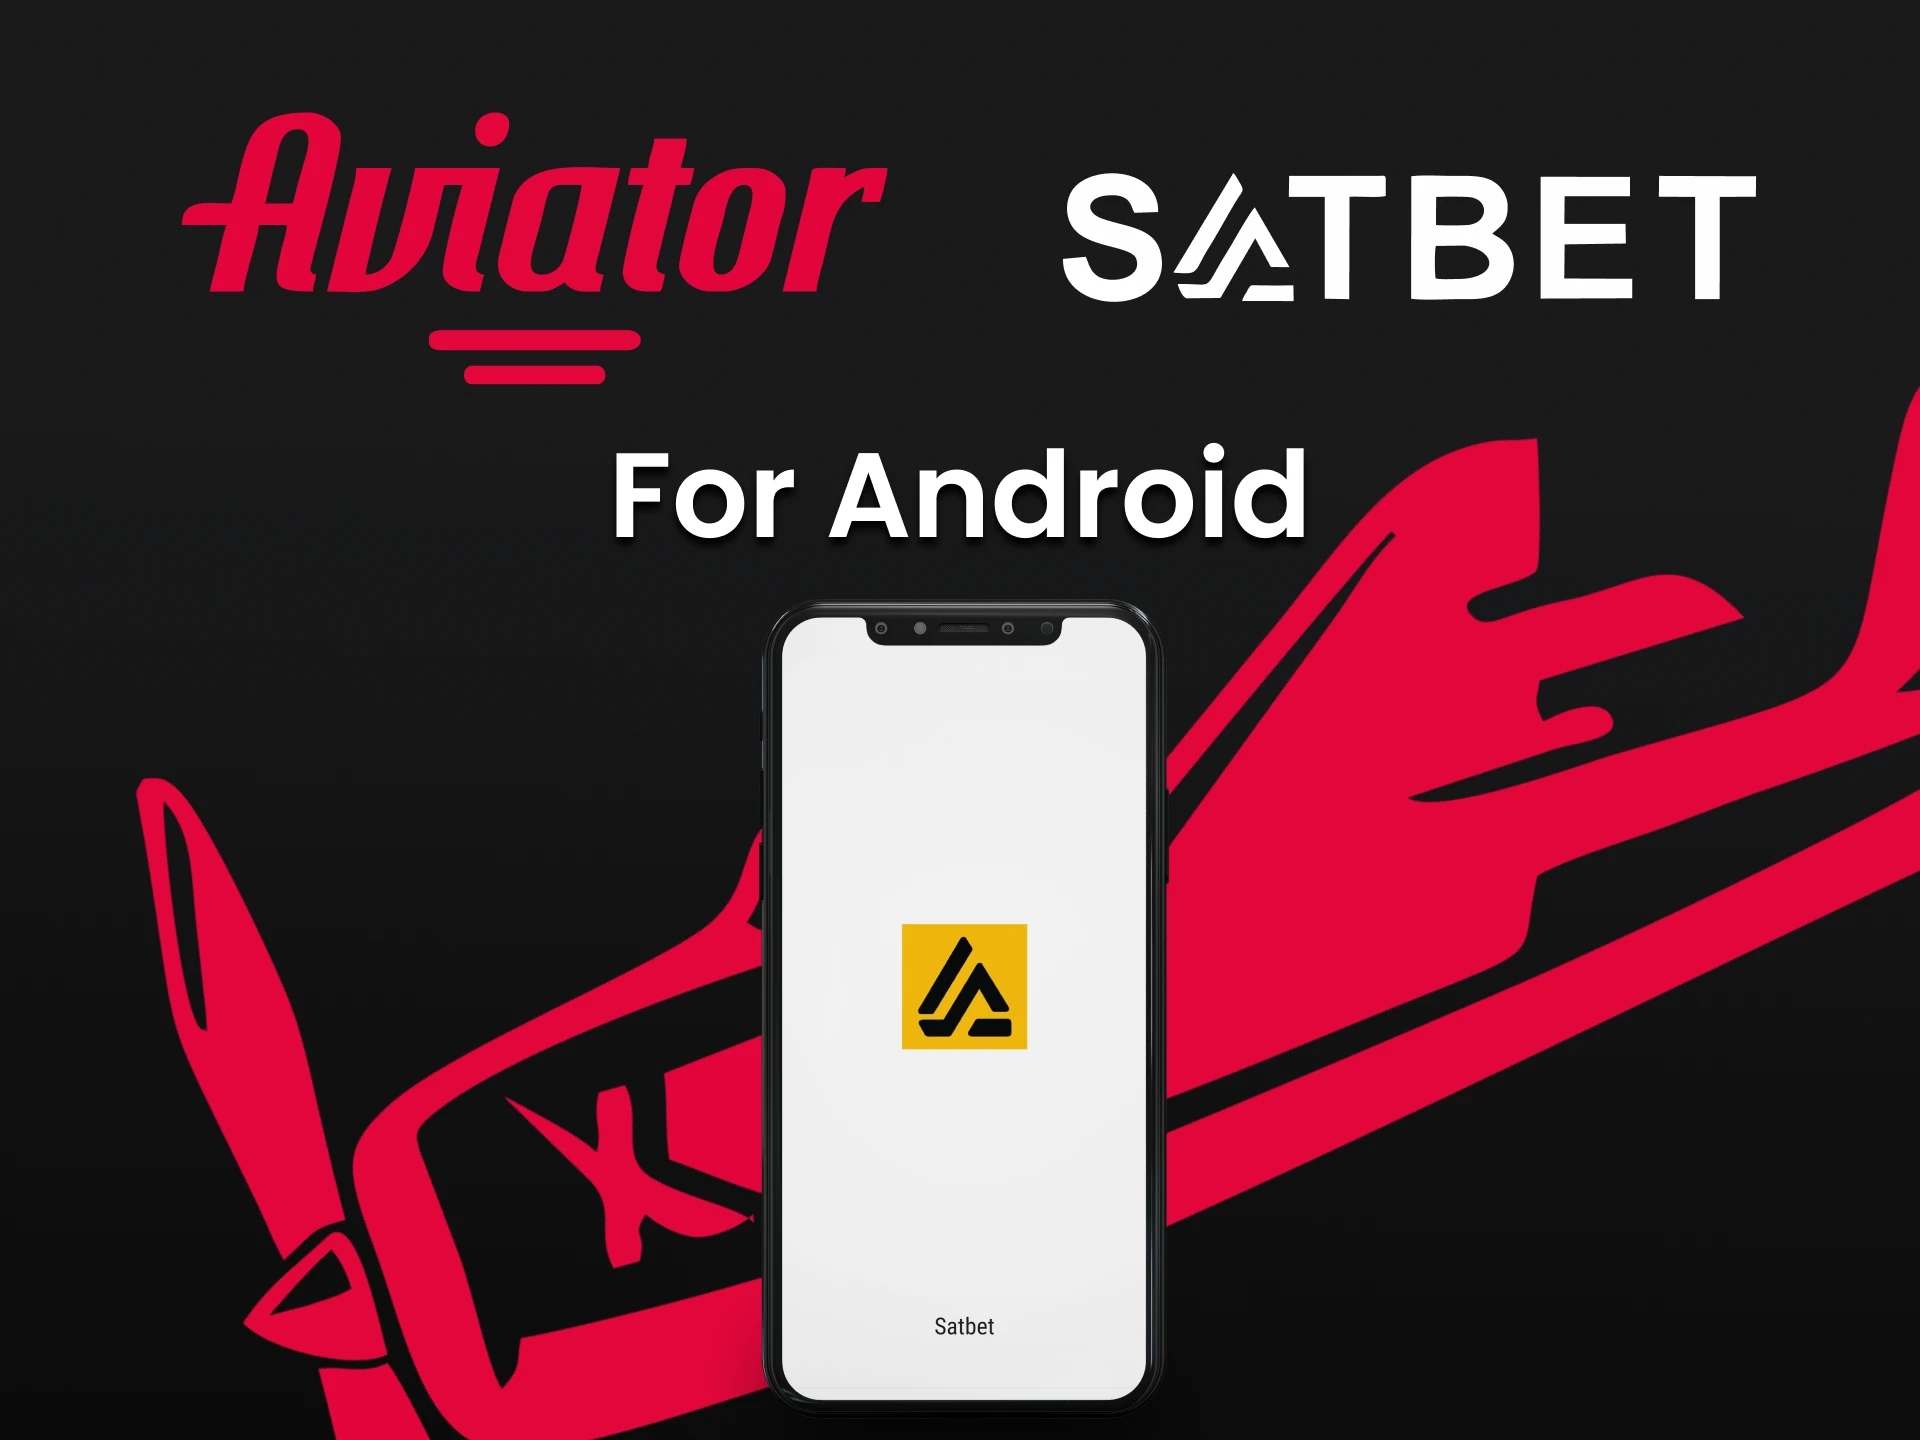 Download the Satbet app for Android.